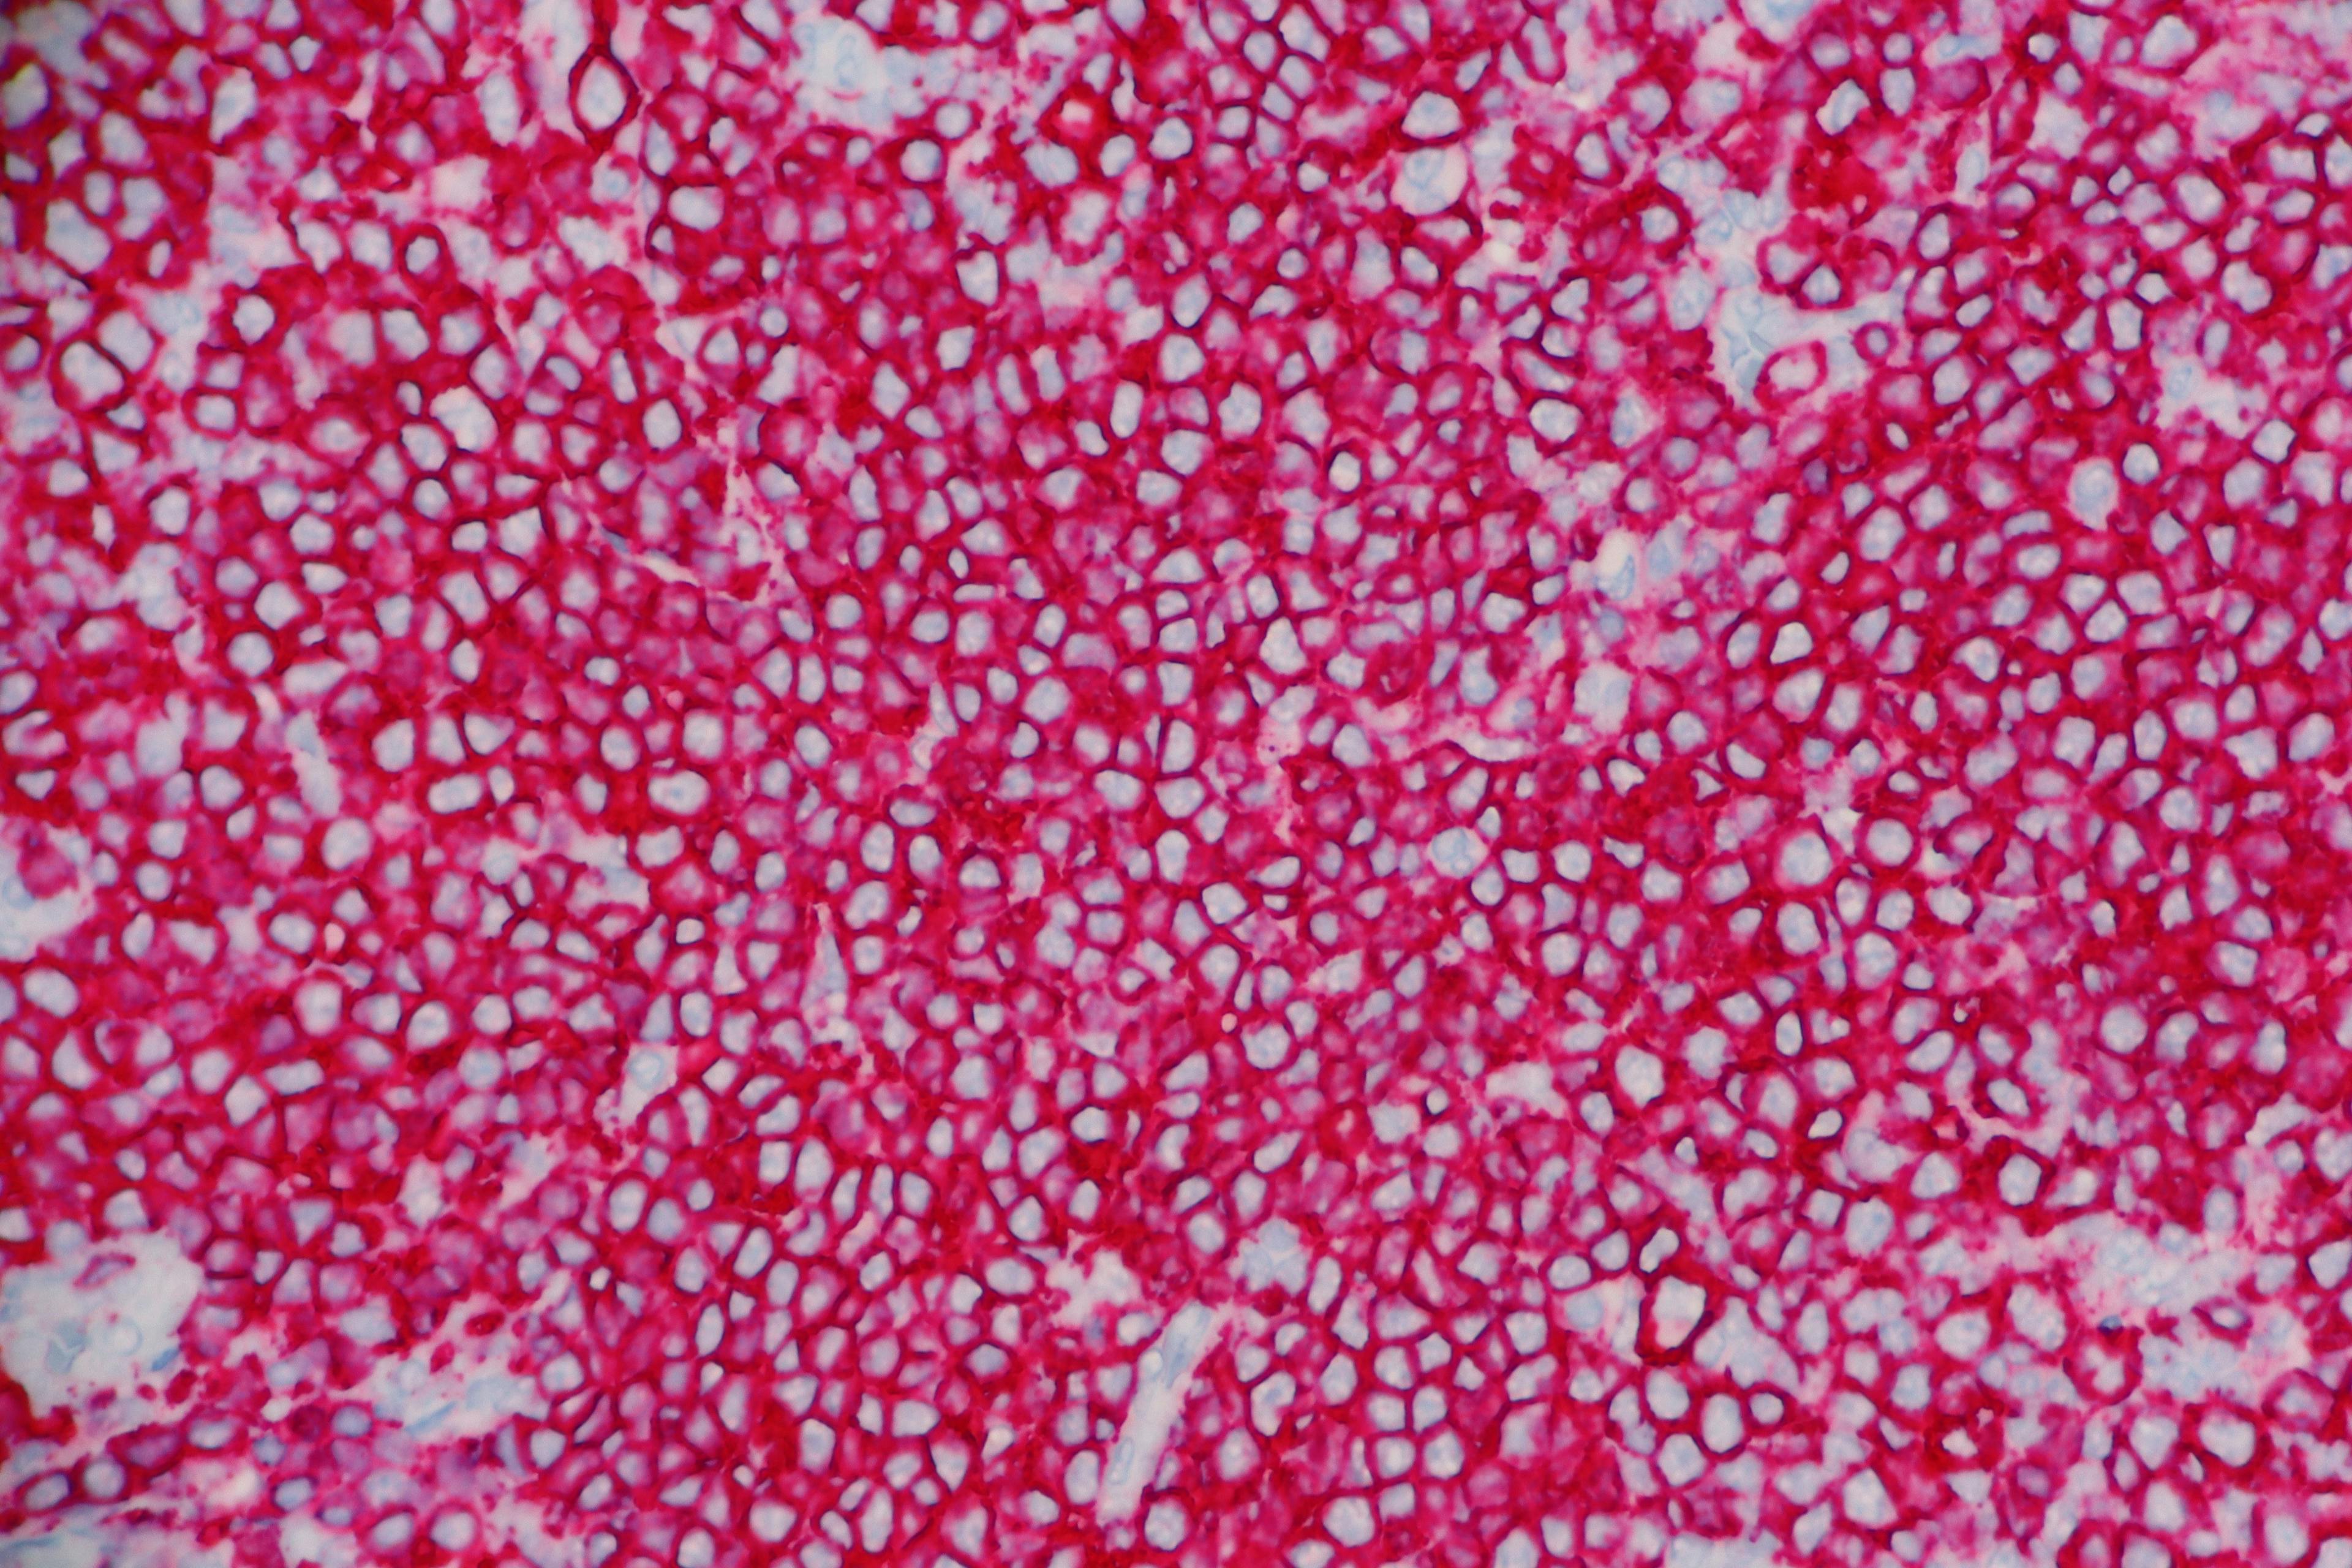 Image Credit: © Lisa - www.stock.adobe.com | High grade follicular lymphoma with diffuse Membrane expression (red) of the B-cell marker called CD 20. The nuclei appear light blue in this stain. Microscopic view